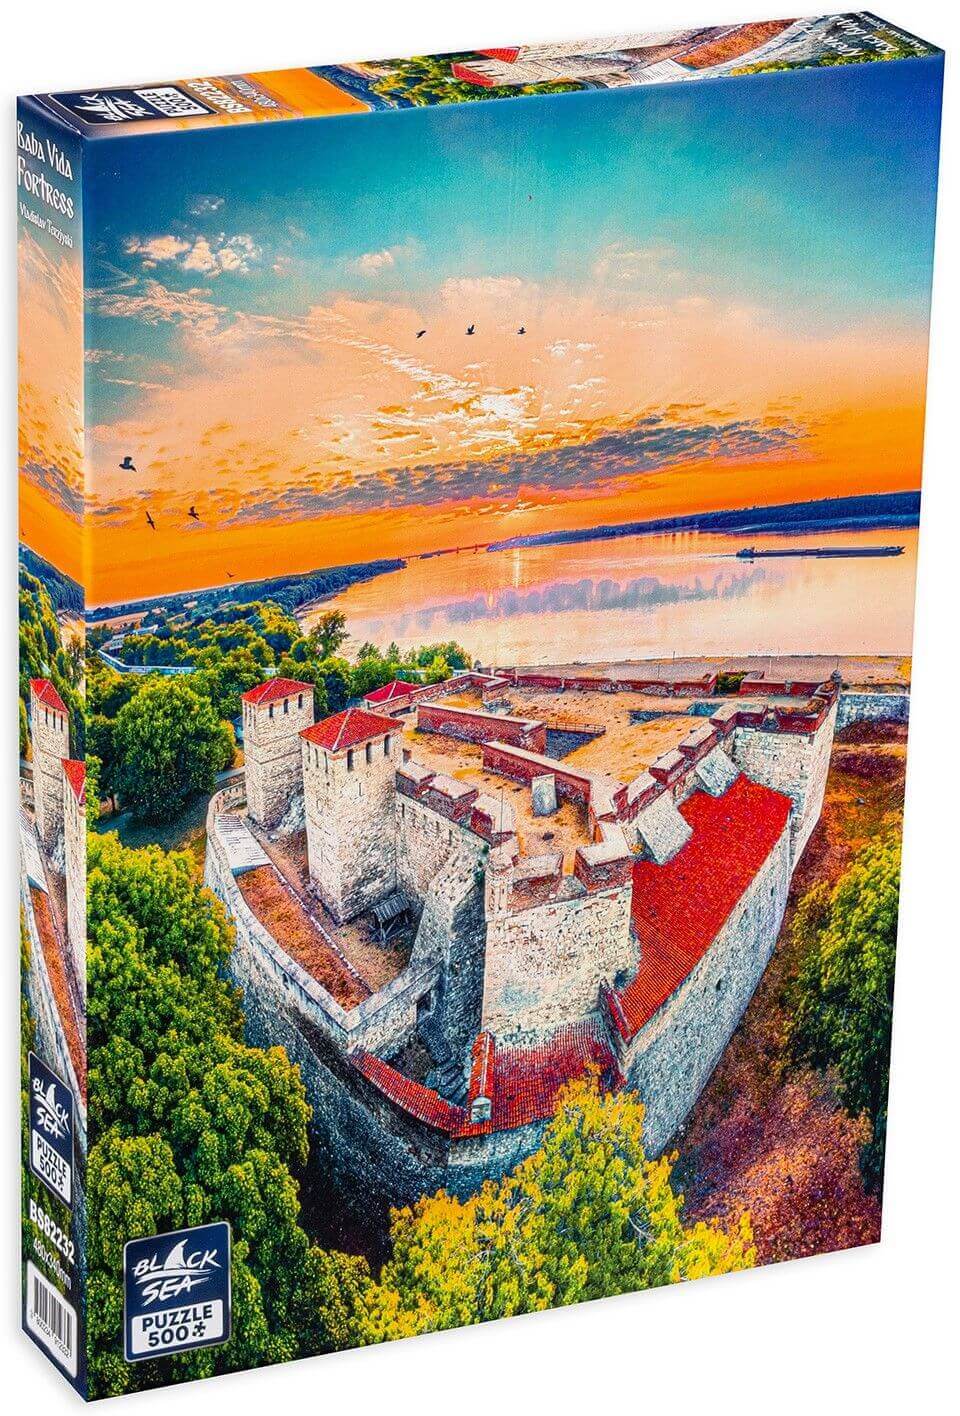 Puzzle Black Sea 500 pieces - Baba Vida Fortress, Vladislav Terziyski is not only a photographer, he is an adventurer and a true lover of the mountain. For more than 10 years he takes up the challenge to conquer the most inaccessible places and battle the